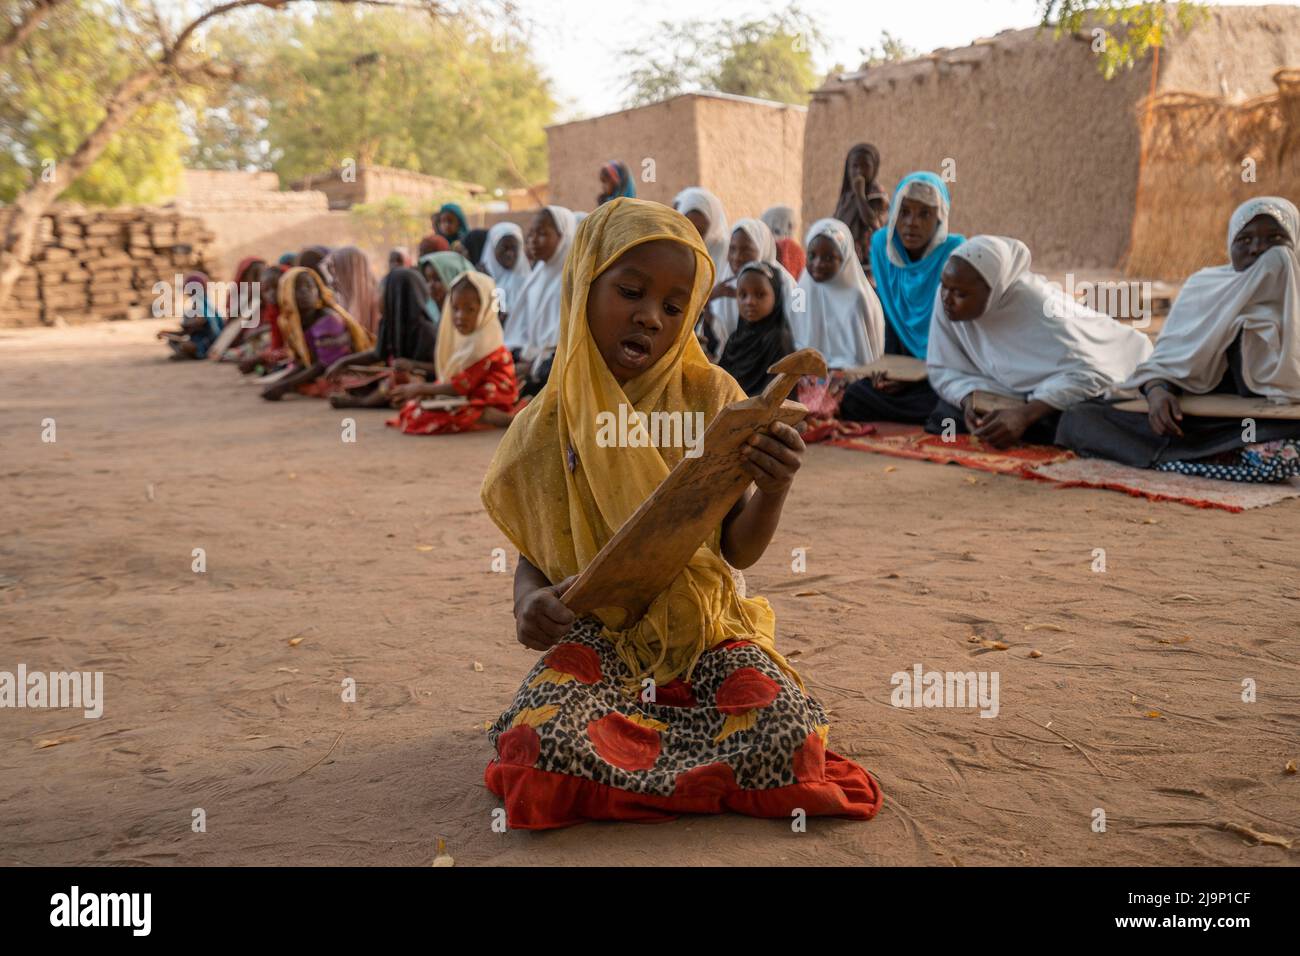 N'Djamena, Chad - March 17 2019:Girls studying as hafiz in a village in Africa. They memorize the verses of the Qur'an by writing them on the boards. Stock Photo